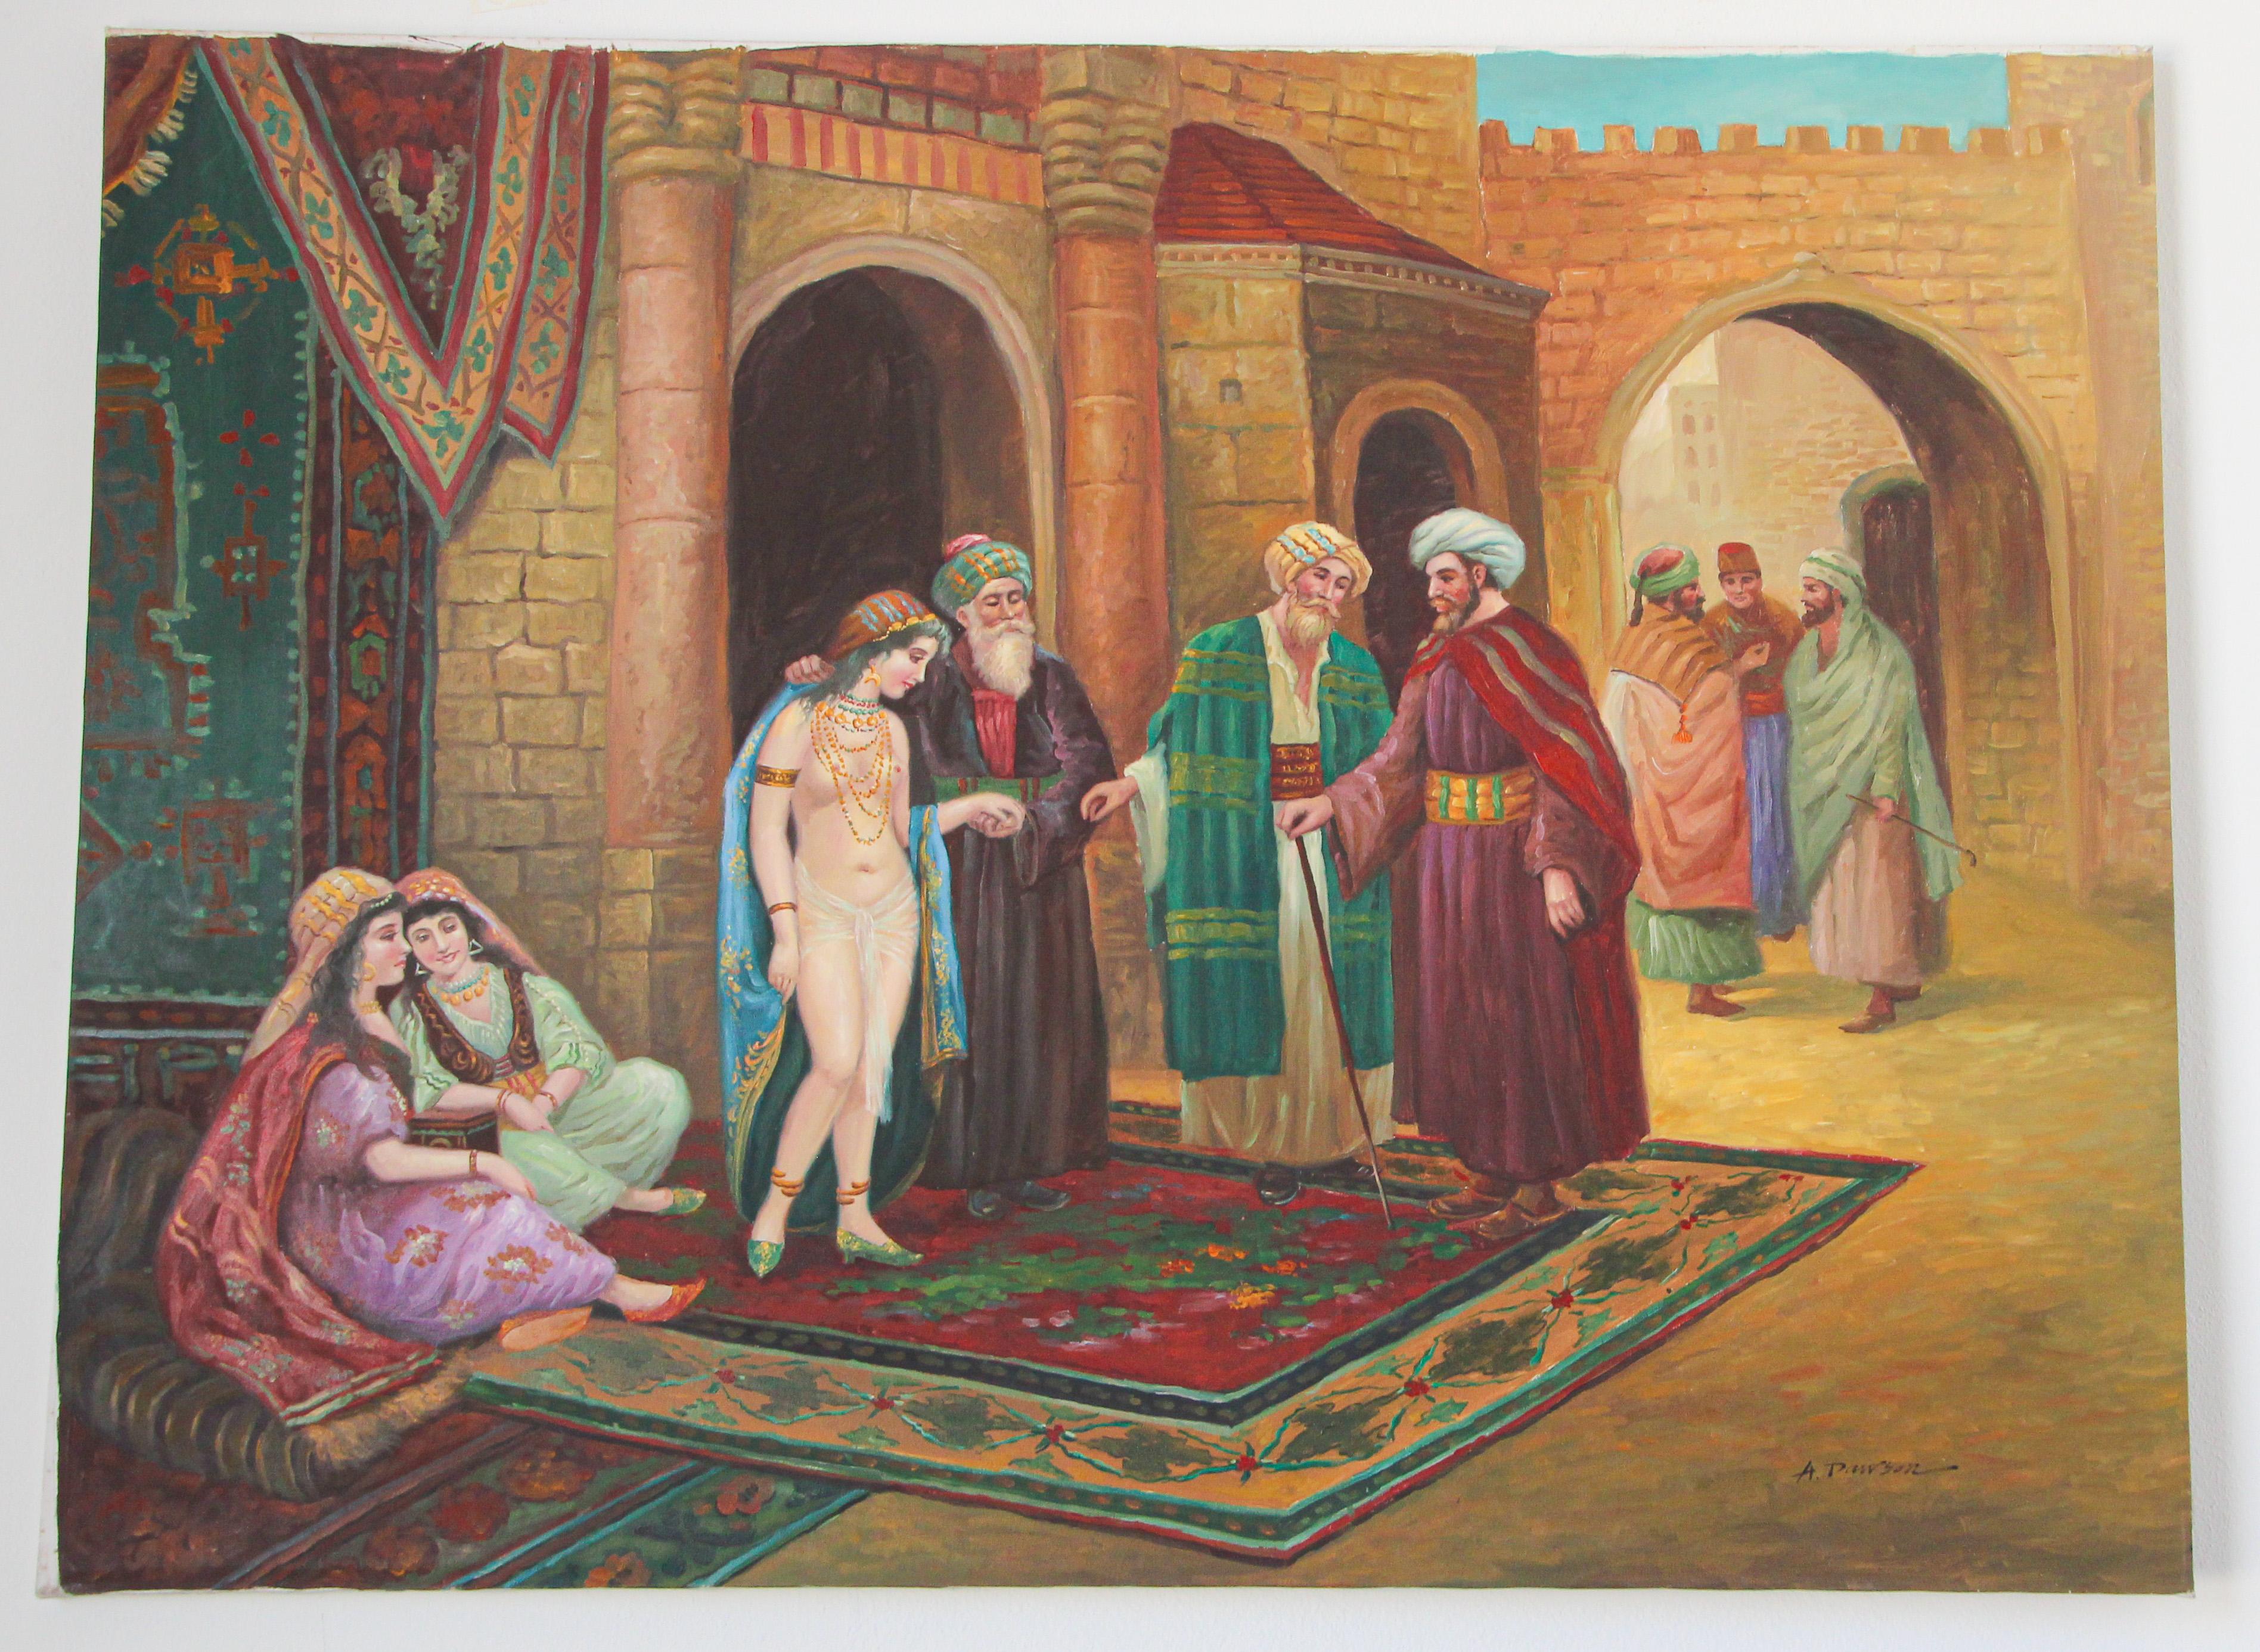 19th century style painting of Moorish orientalist market scene.
19th century style oil on canvas style painting with Moorish men and women wearing period caftans and turbans, women seating on rugs.
Probably Morocco or Maghreb showing medieval